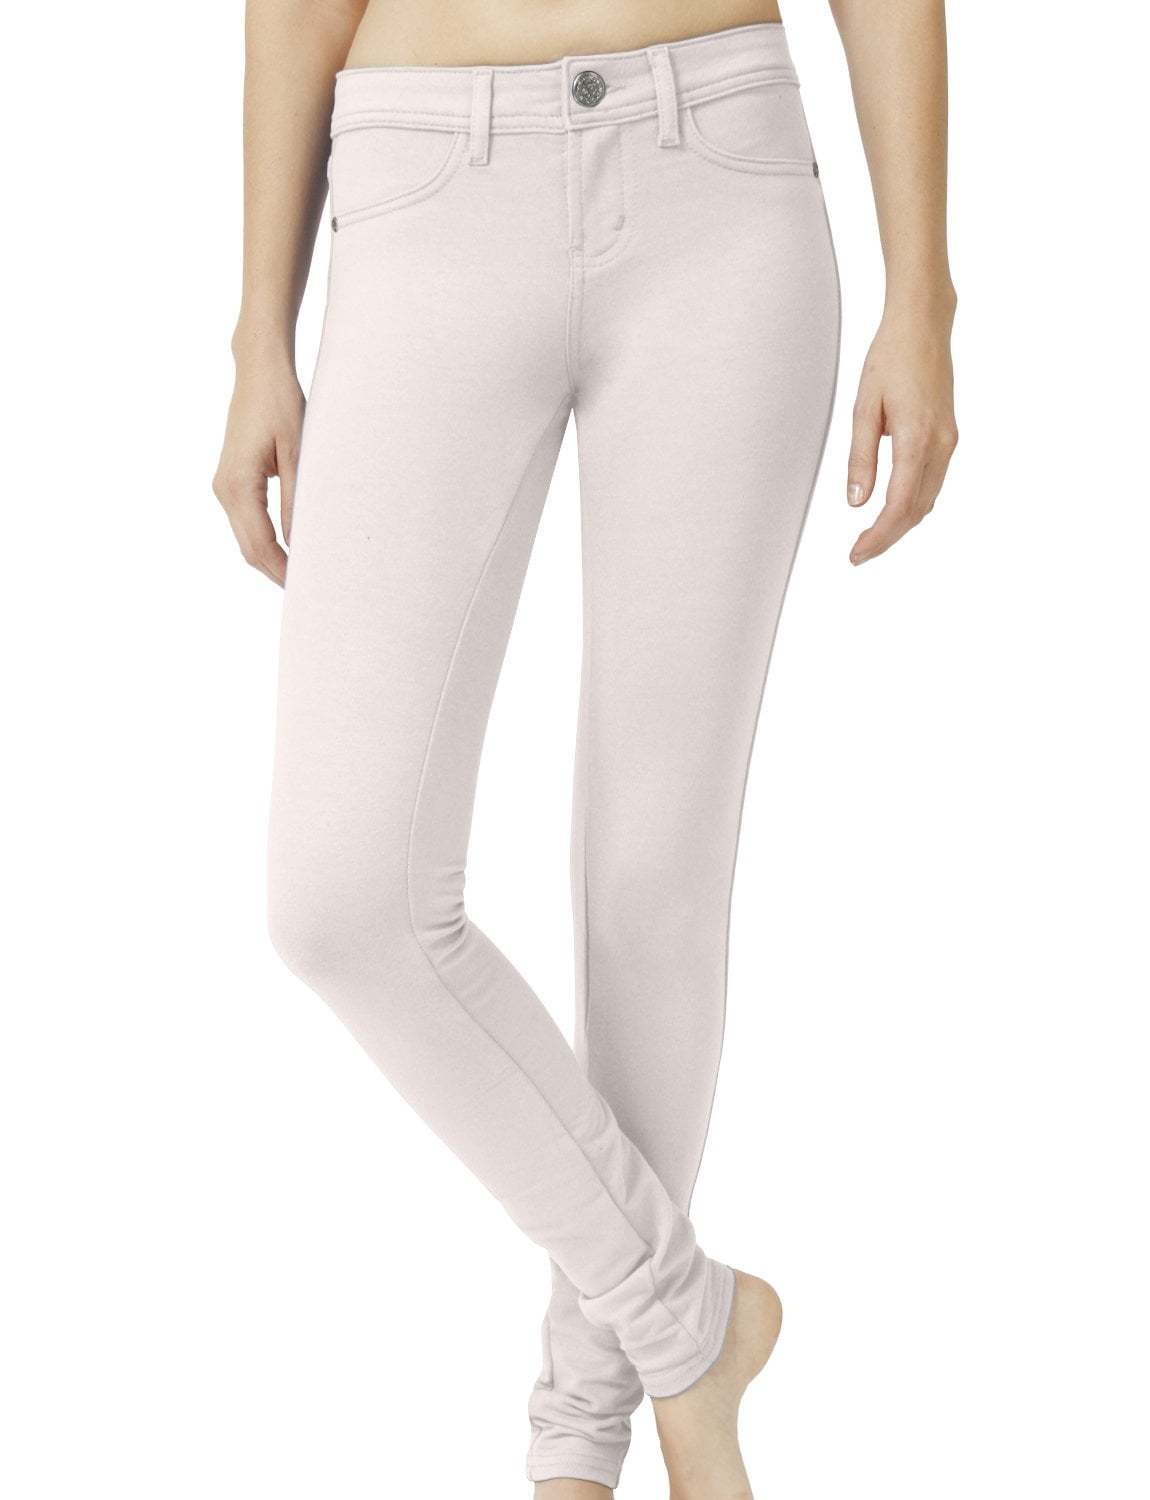 Women's High-rise Washed Flare Seamed Leggings - Wild Fable™ Off-white Xxl  : Target